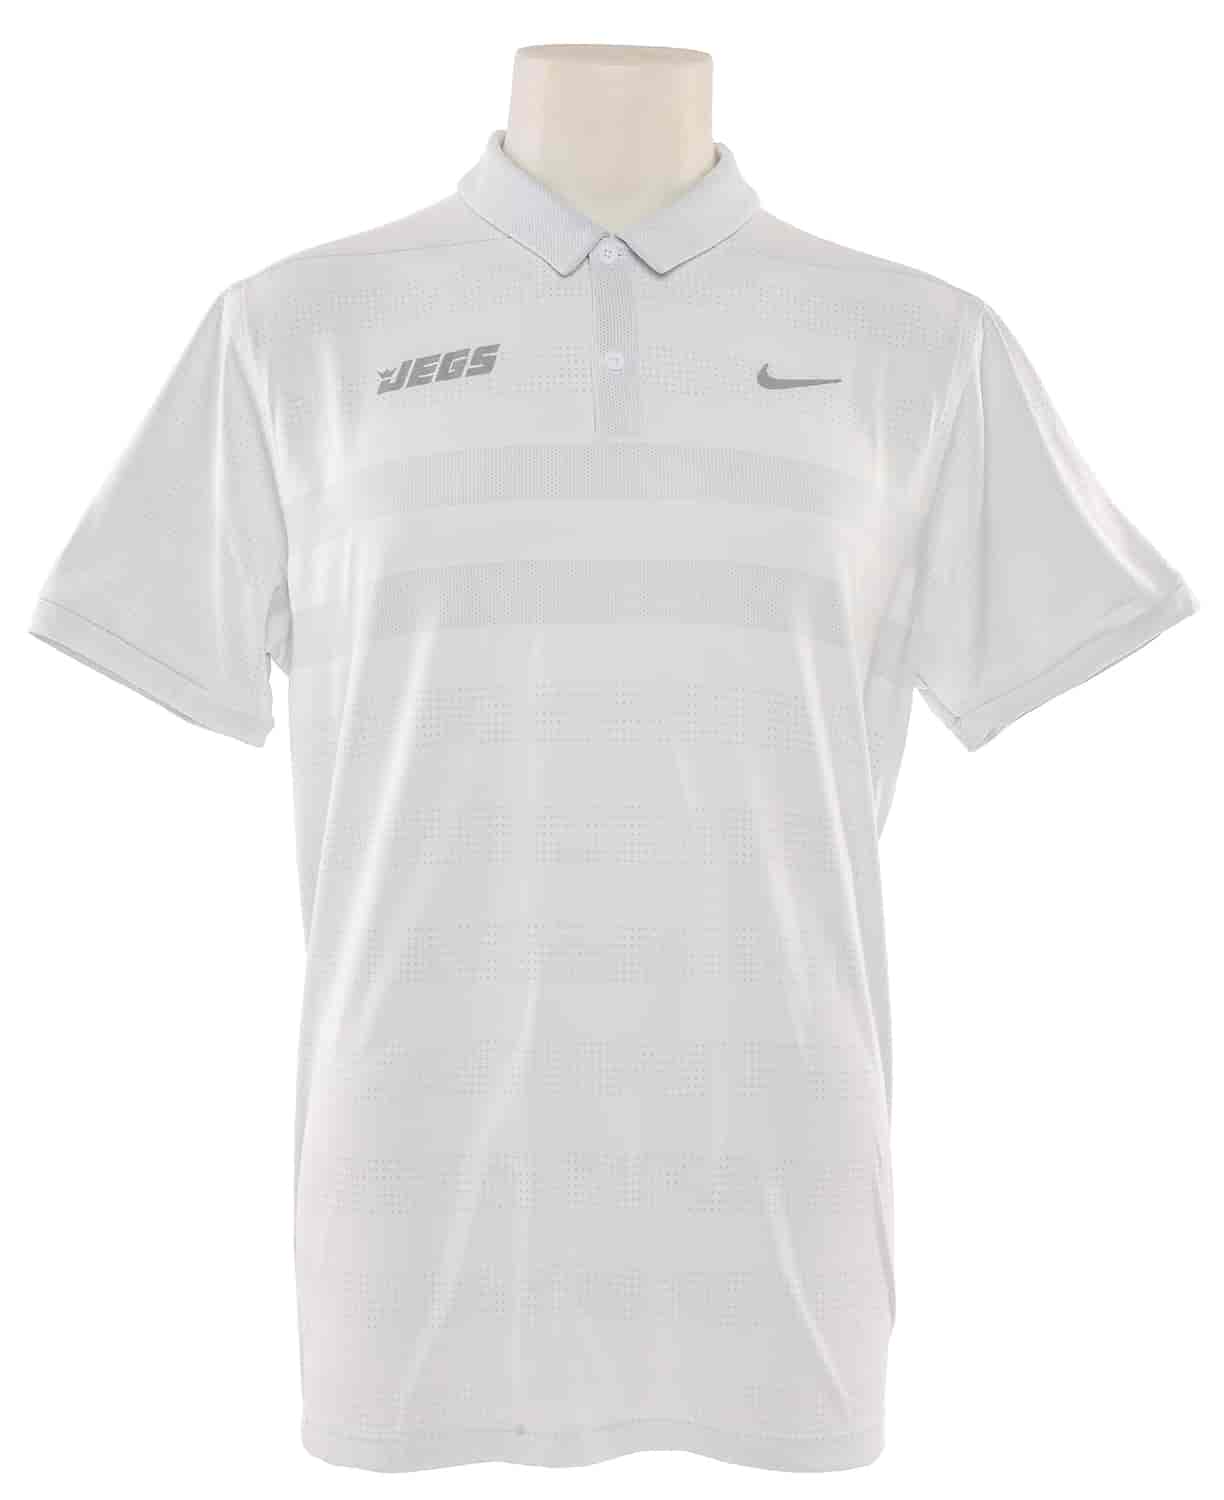 JEGS Men's Nike Zonal Striped Golf Polo | JEGS Apparel and Collectibles -  JEGS High Performance